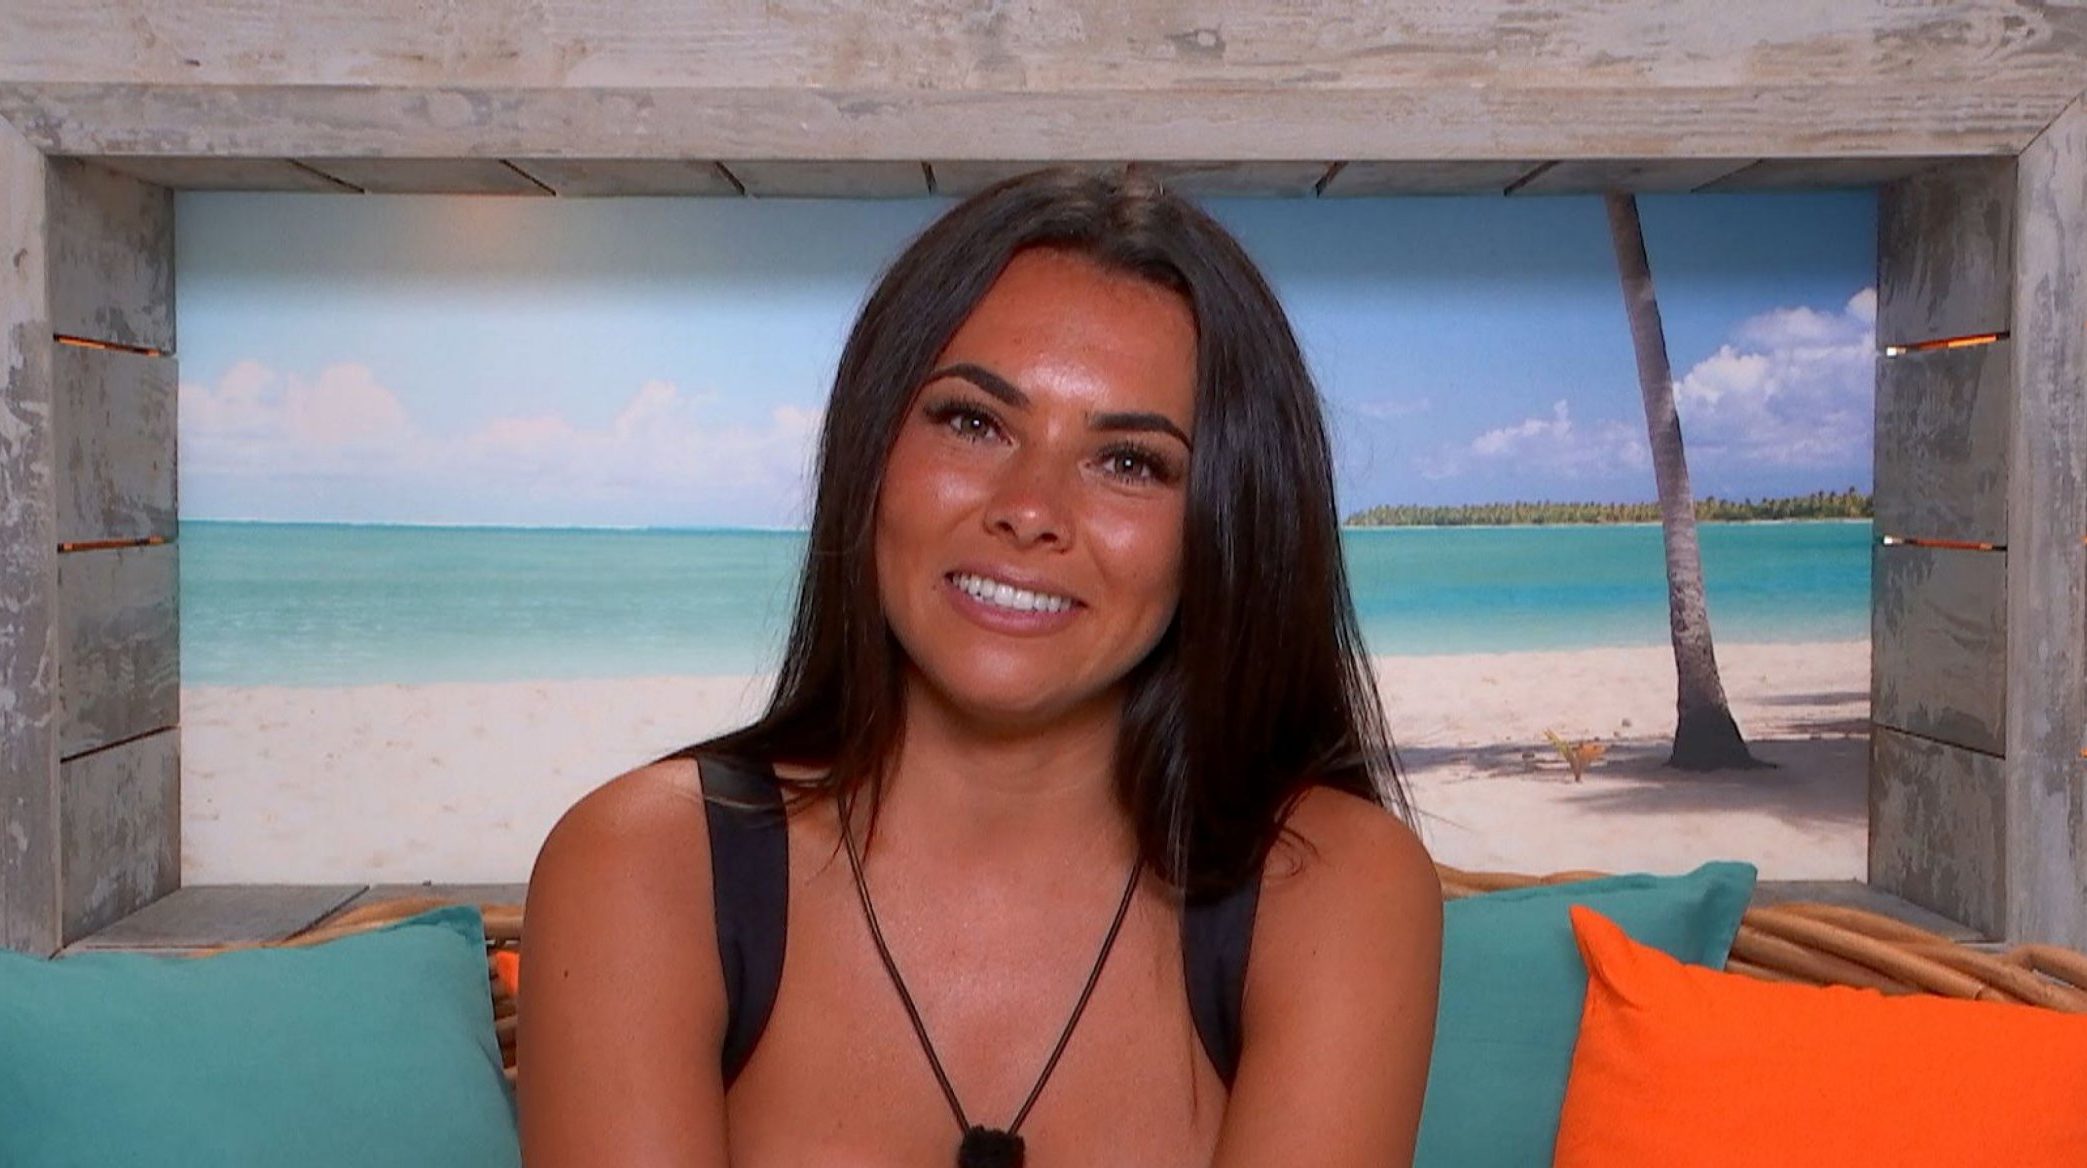 Love Island’s Paige Thorne slams co-stars ‘talking s**t’ over secret tension: ‘Why can’t you focus on yourself?’